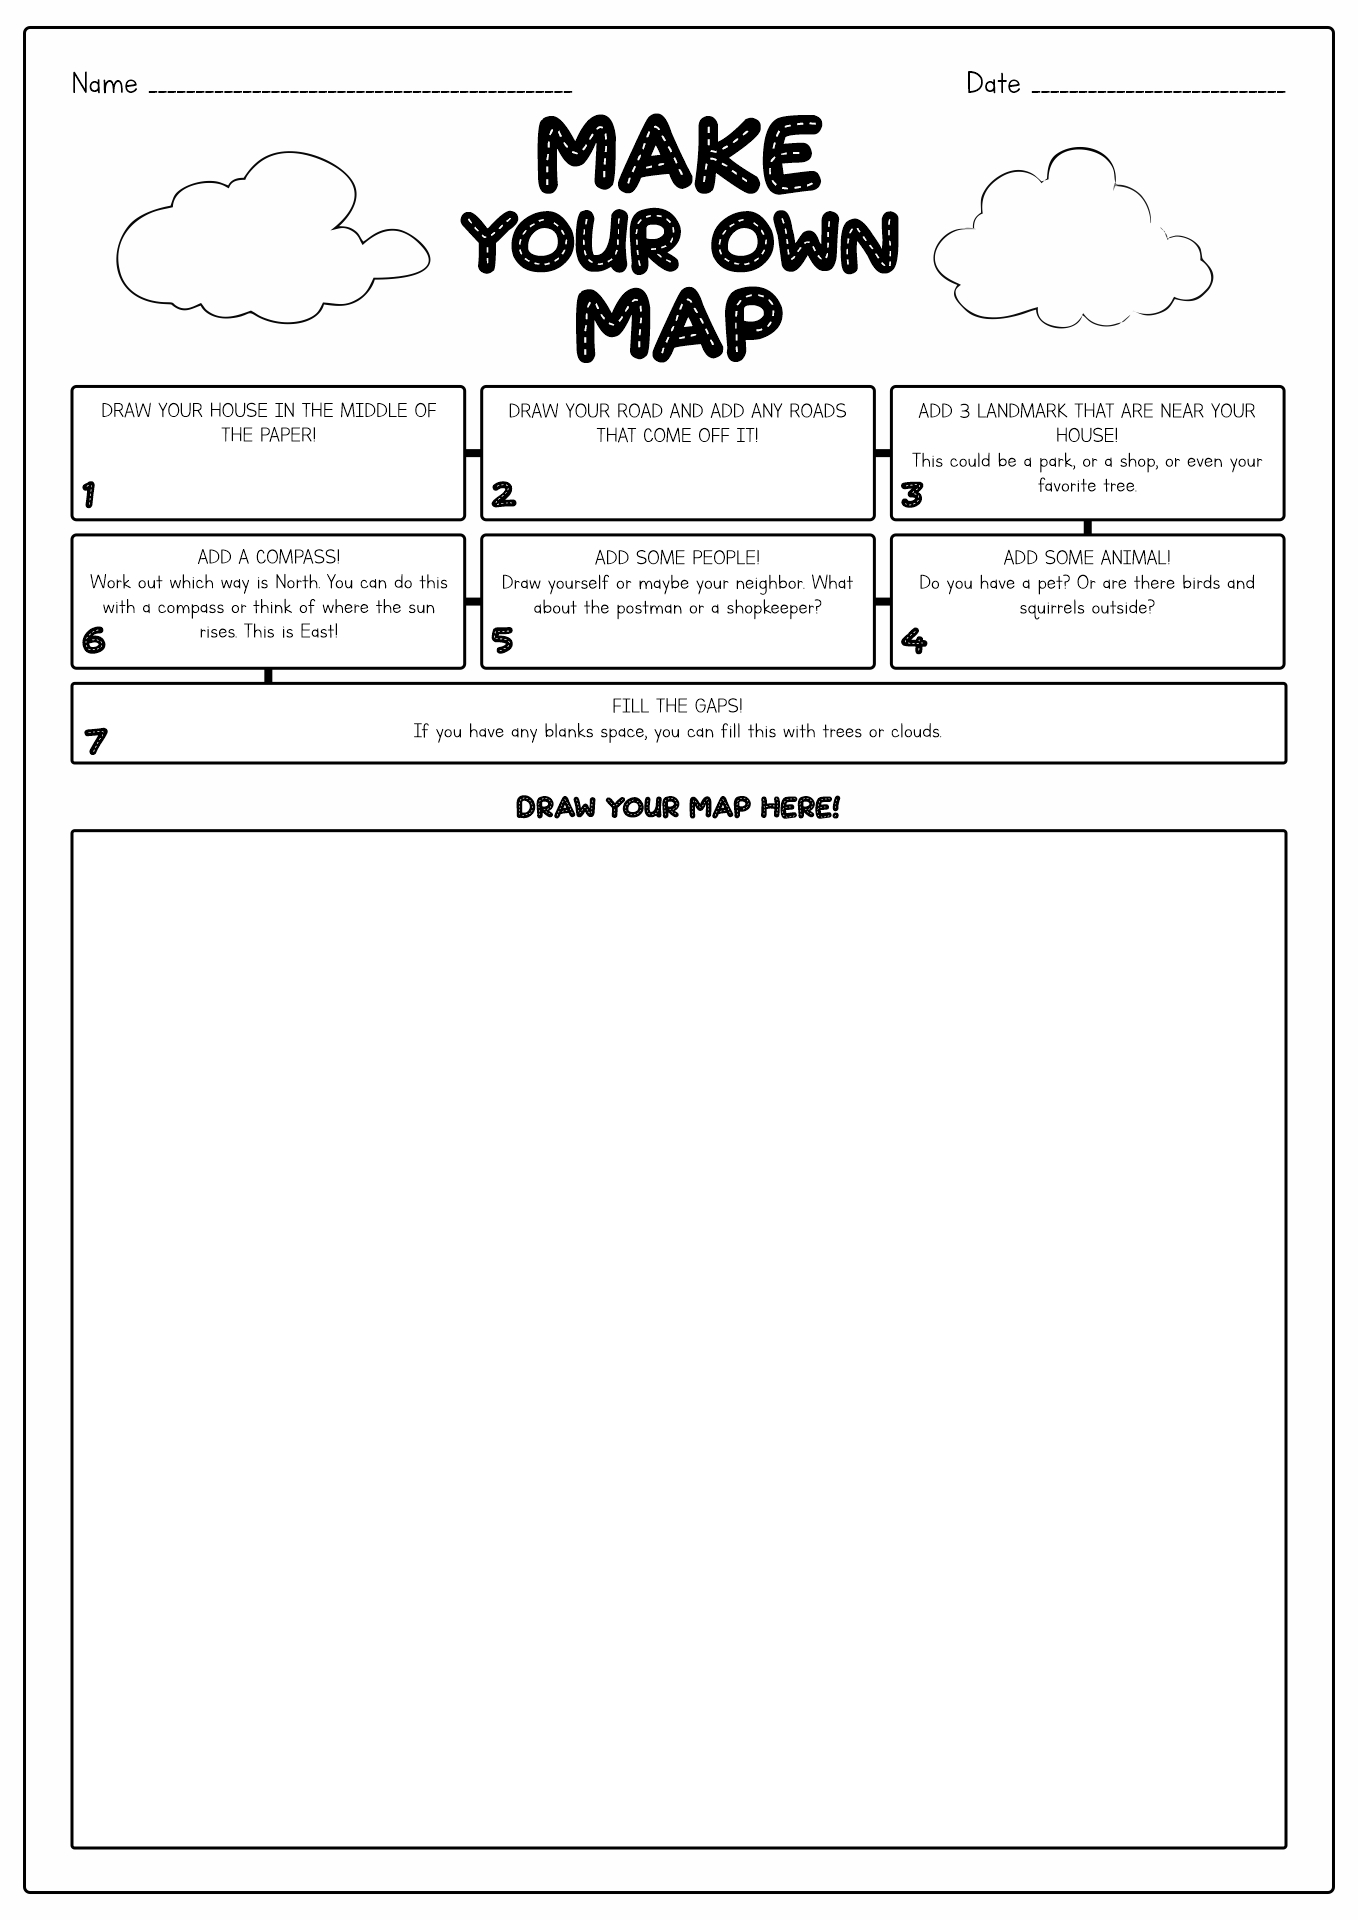 How to Make a Map Worksheets for Kids Image